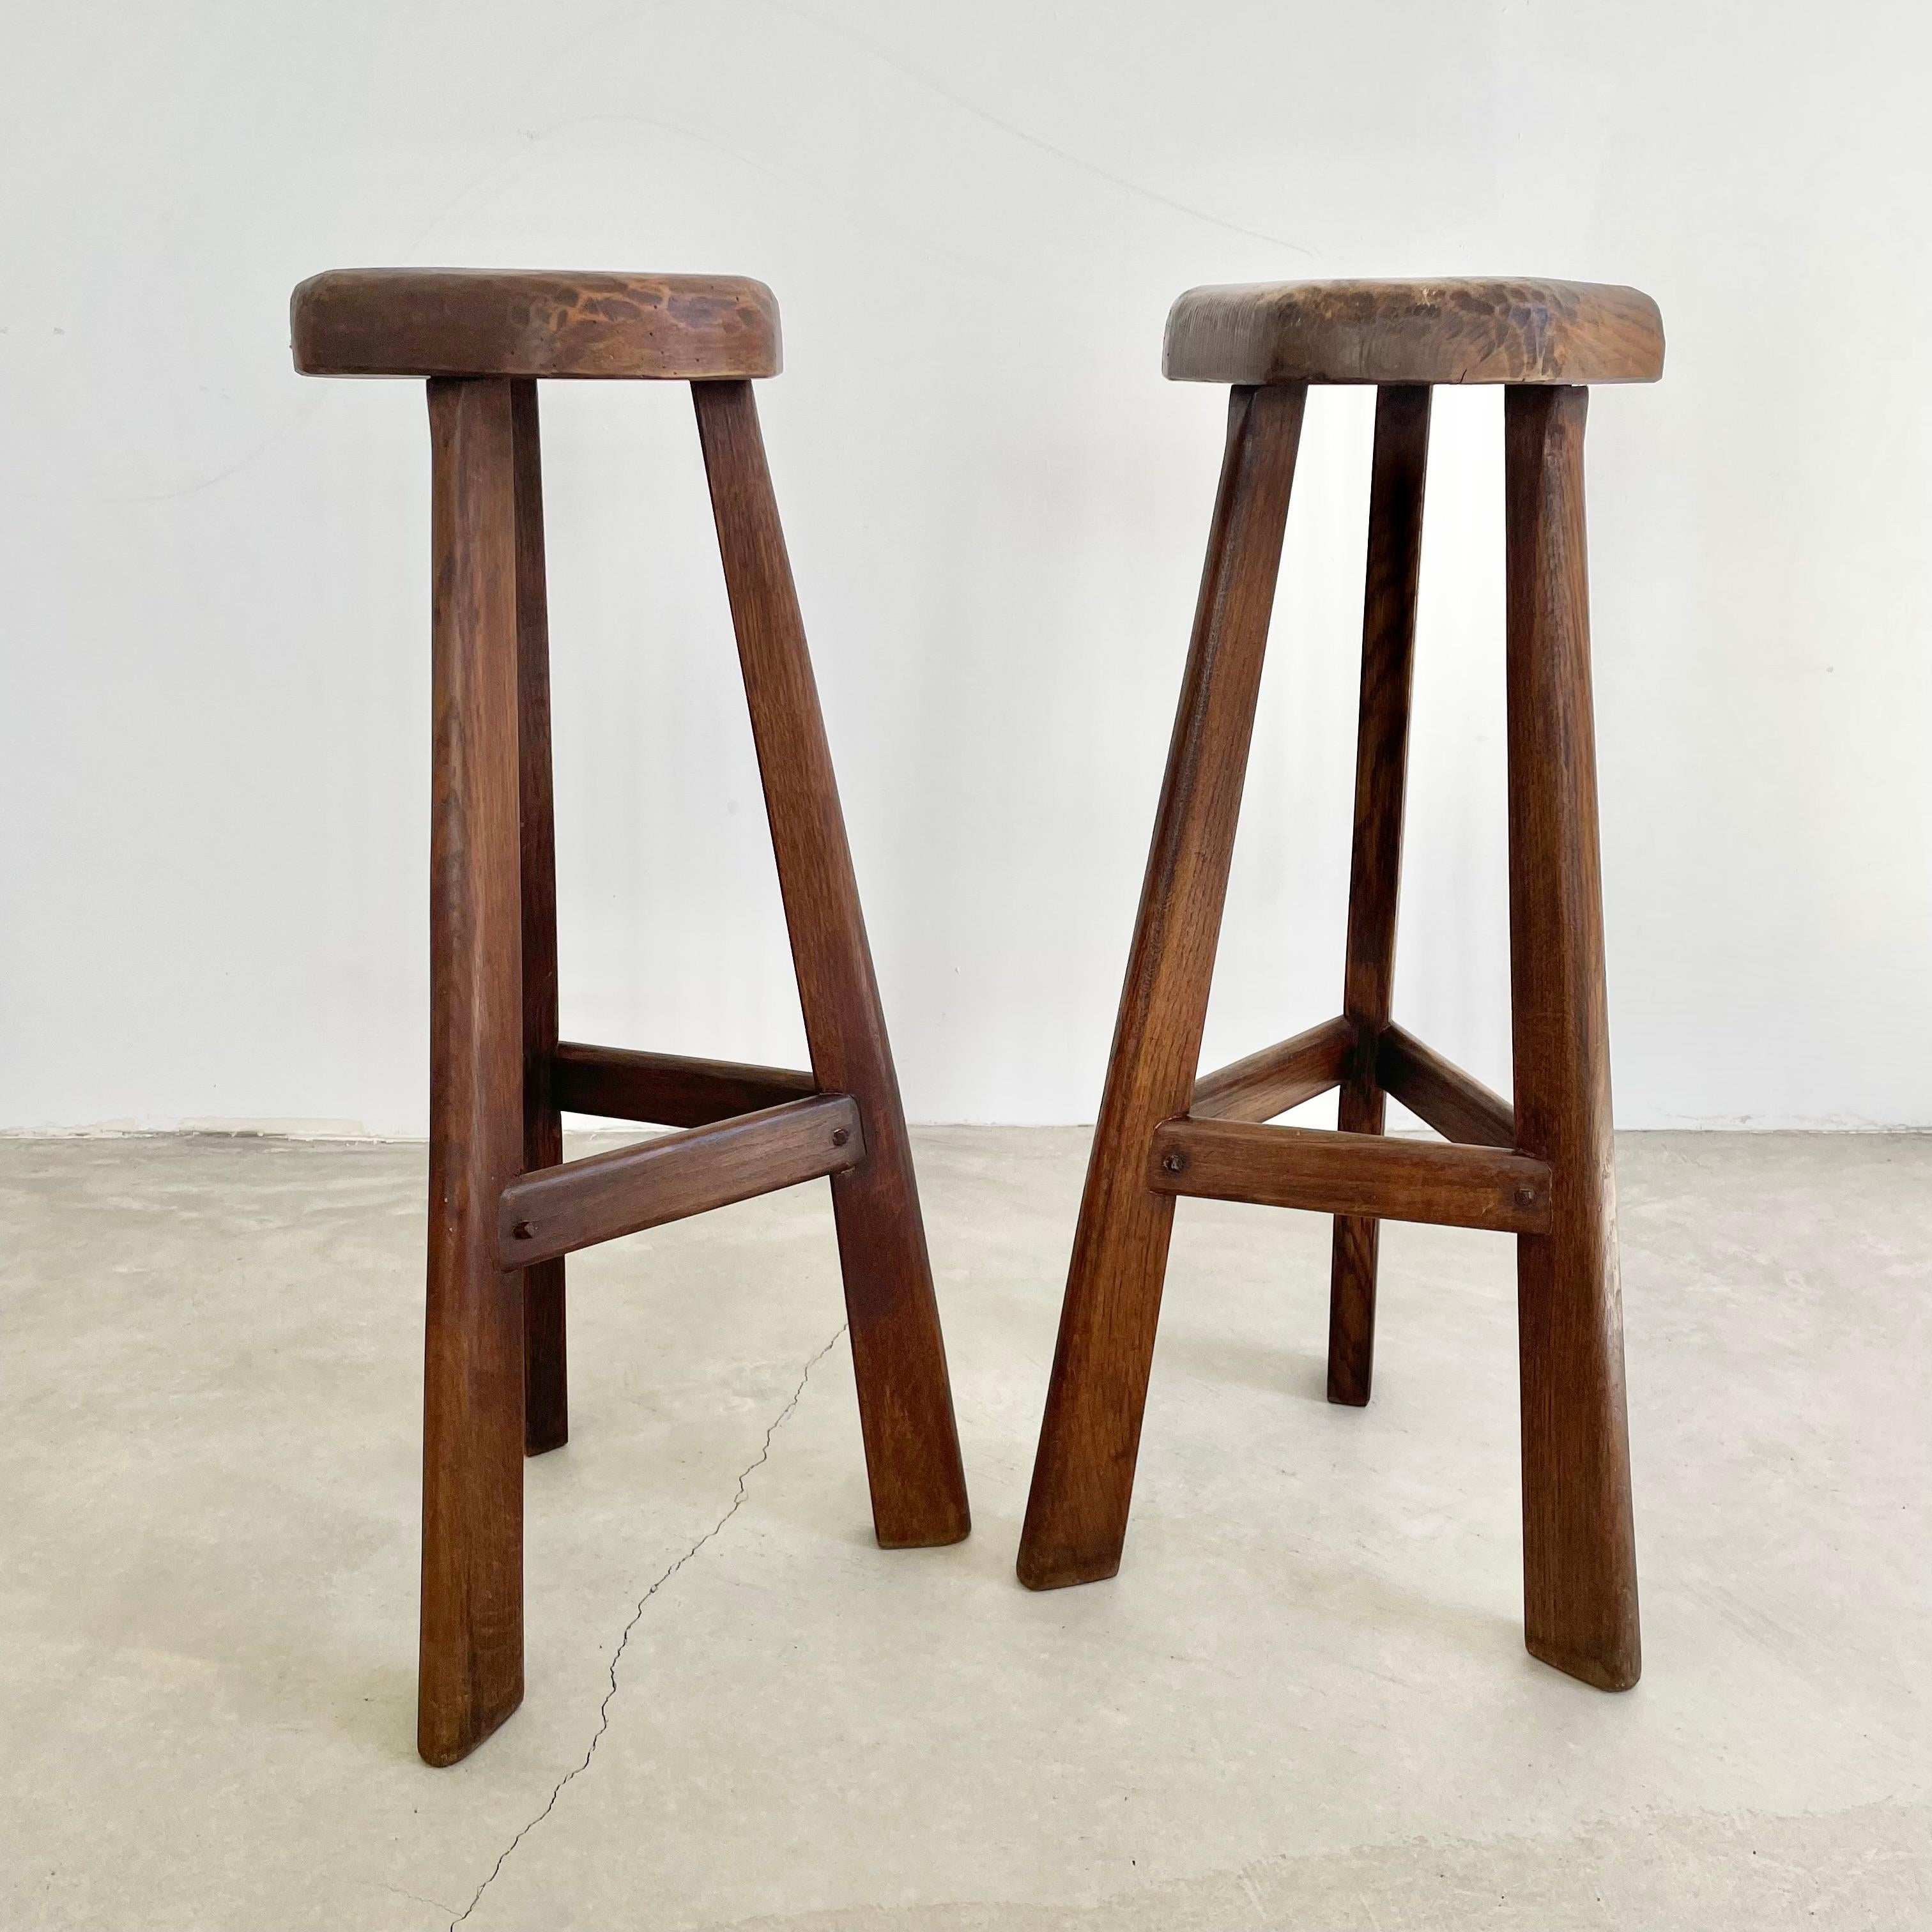 Pair of Tall Brutalist Wood Stools, 1960s France In Good Condition For Sale In Los Angeles, CA